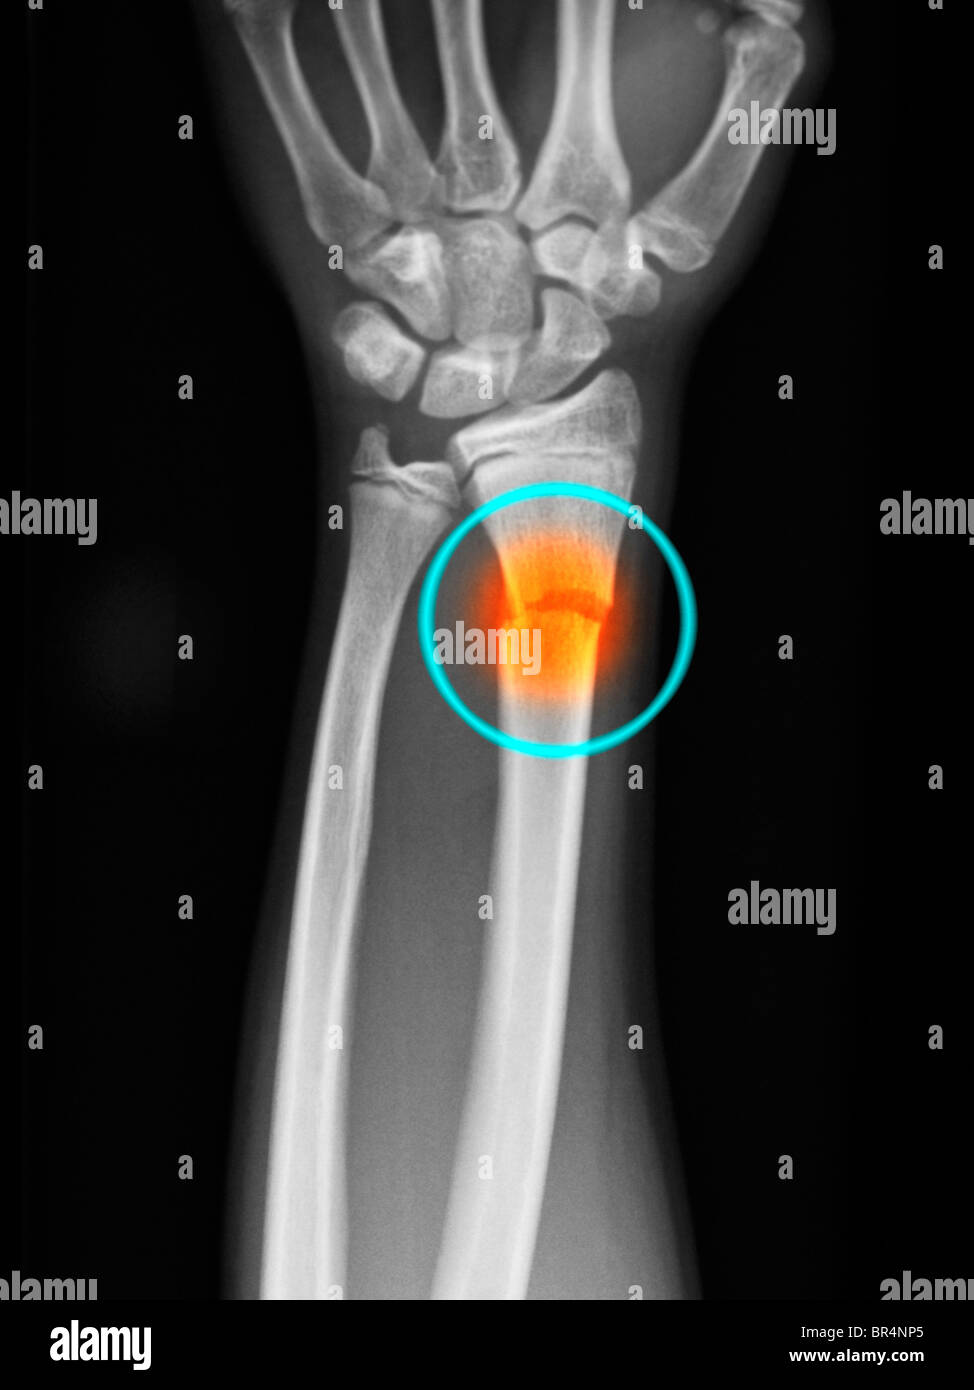 forearm x-ray showing a distal radius fracture in a 14 year old boy Stock Photo